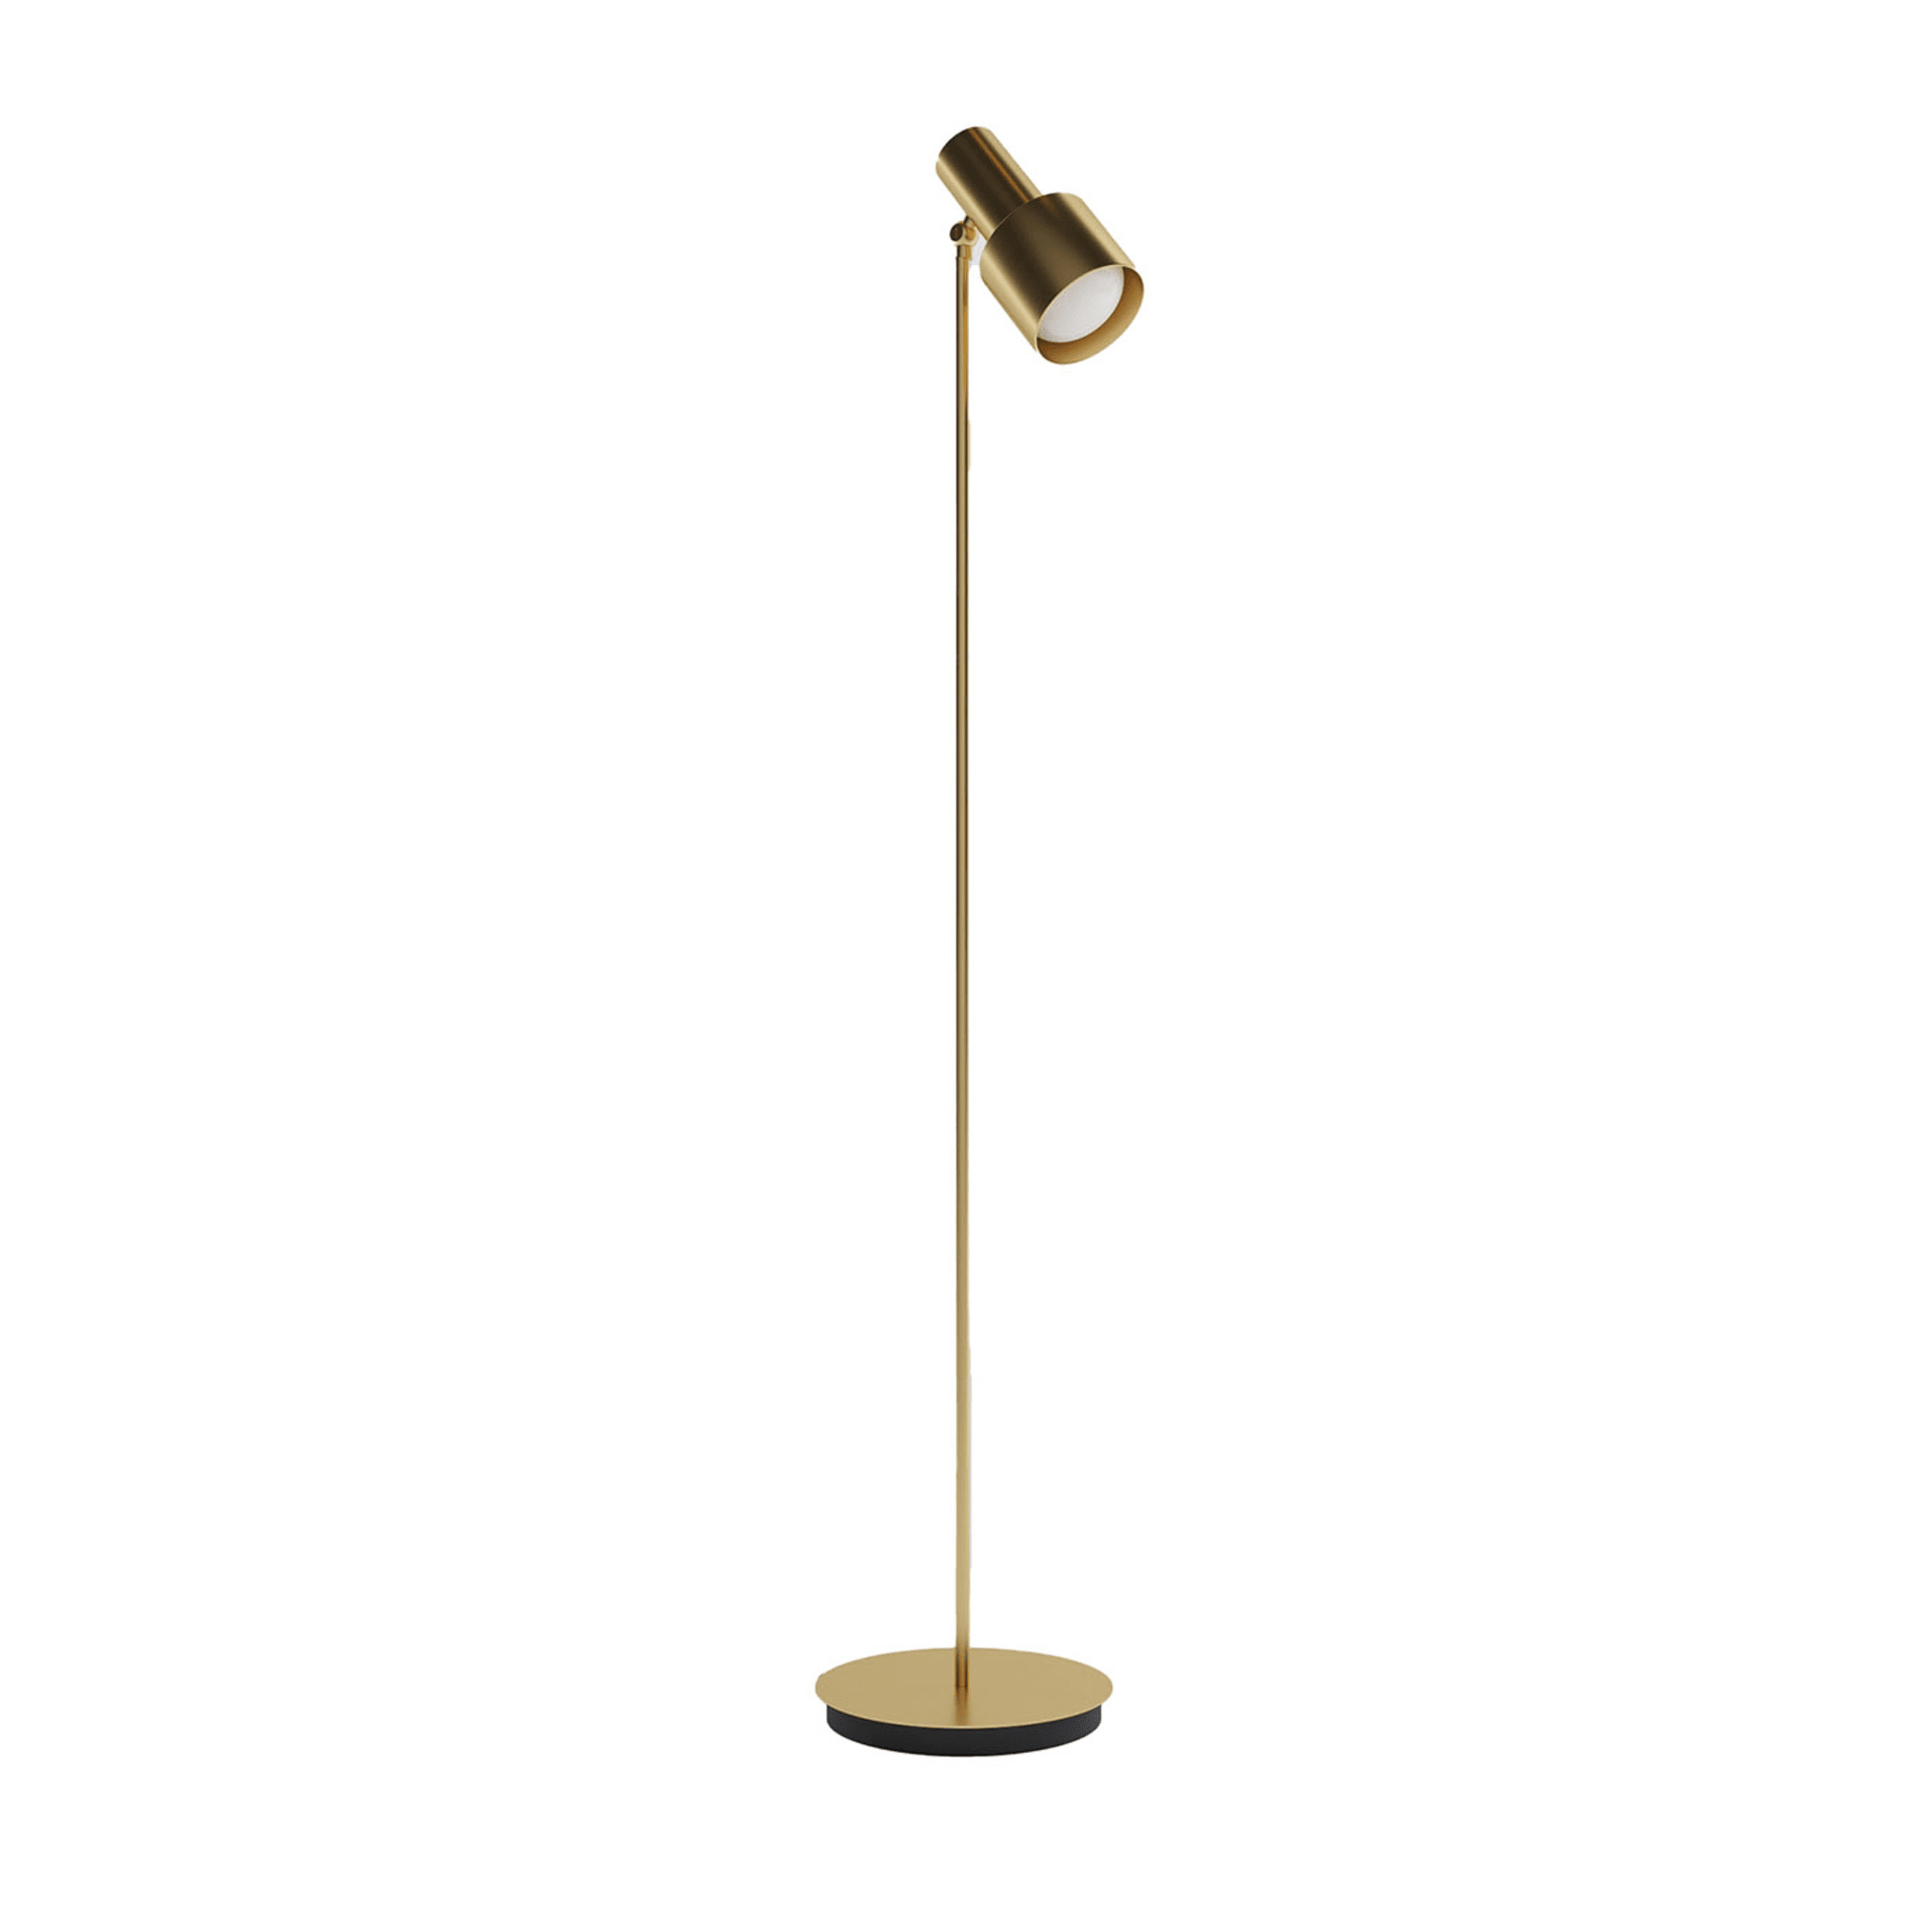 Light Gallery Luxury GP Bronzed Floor Lamp by Marco Pollice - Main view